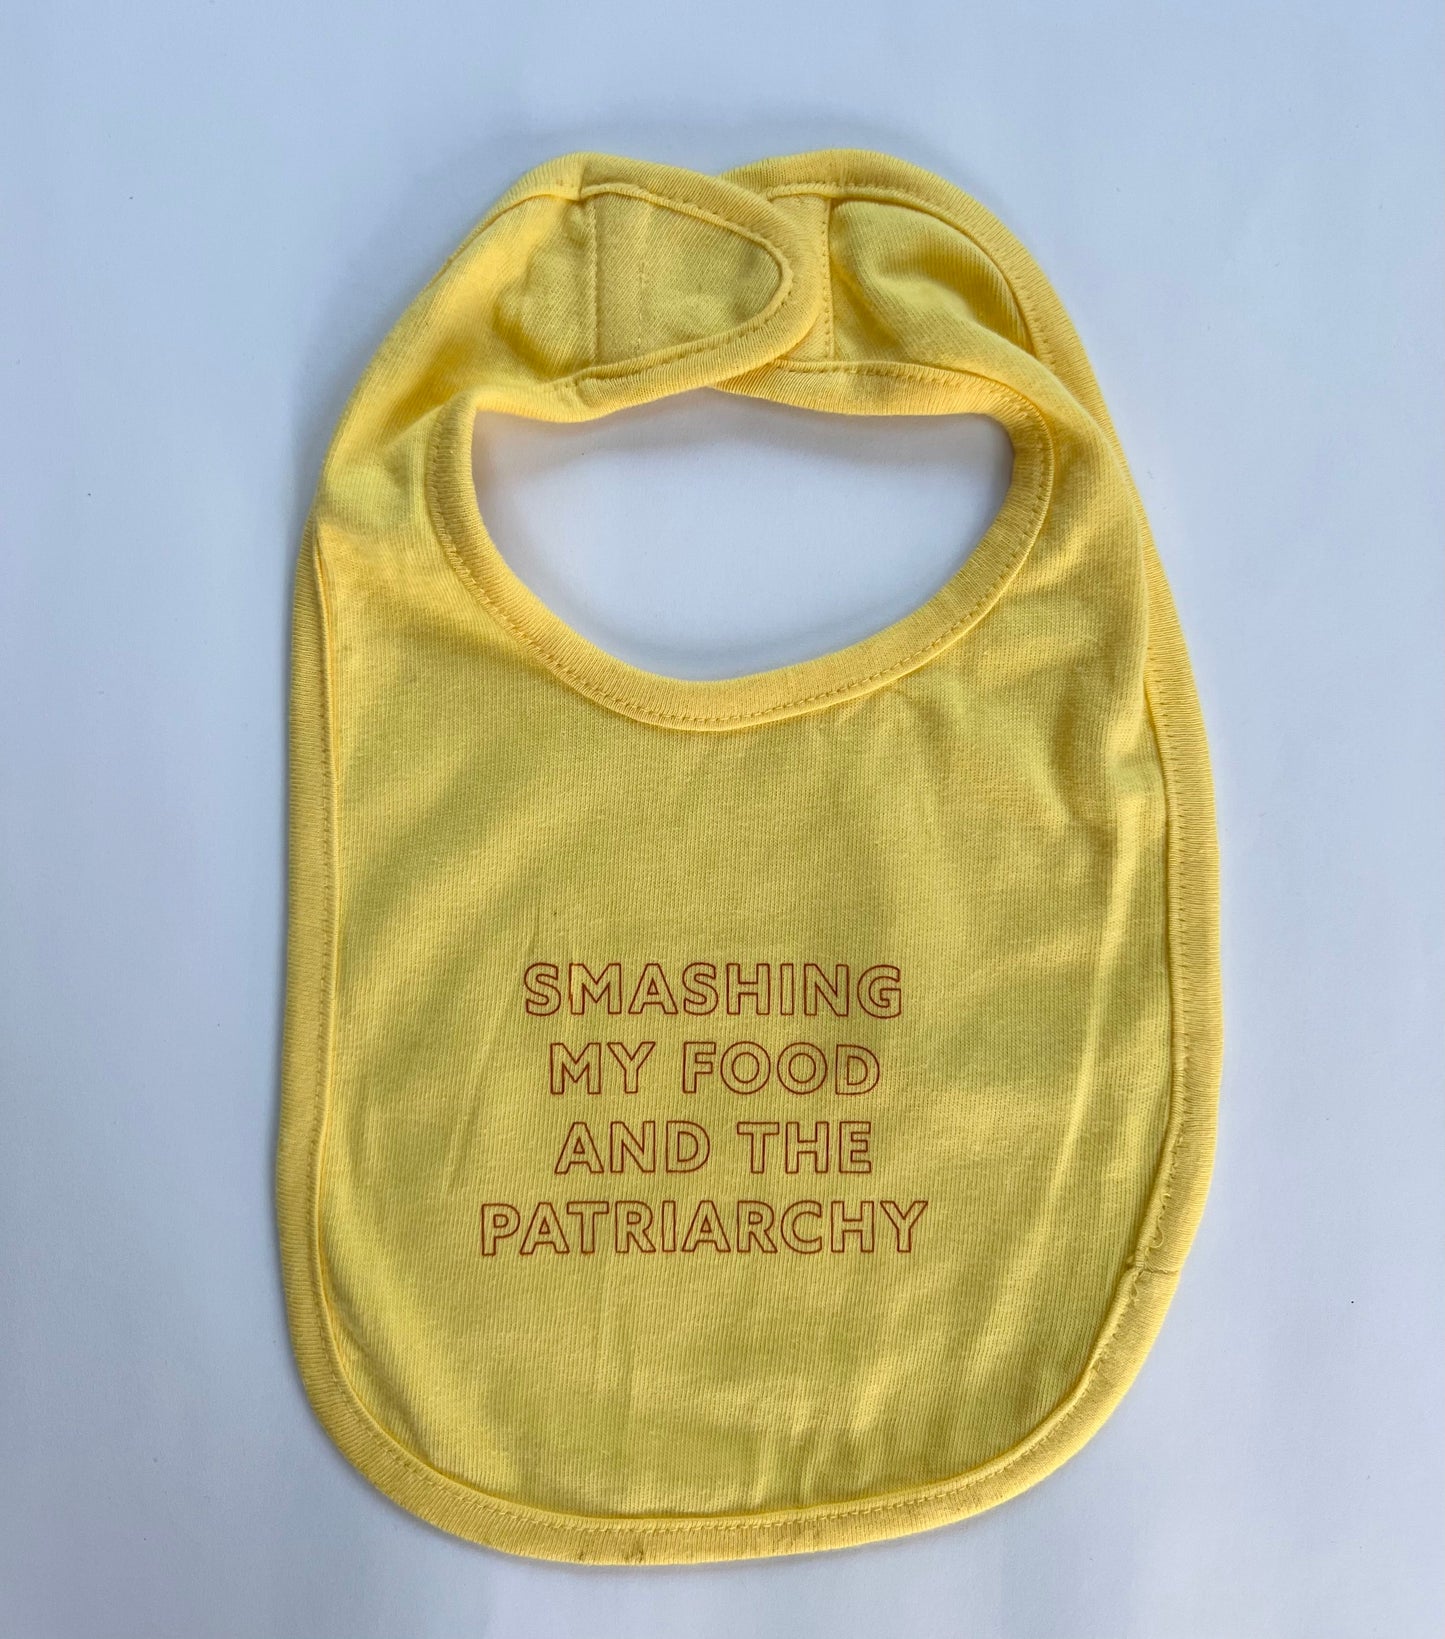 A yellow bib reads "Smashing my Food and the Patriarchy" in red block letters